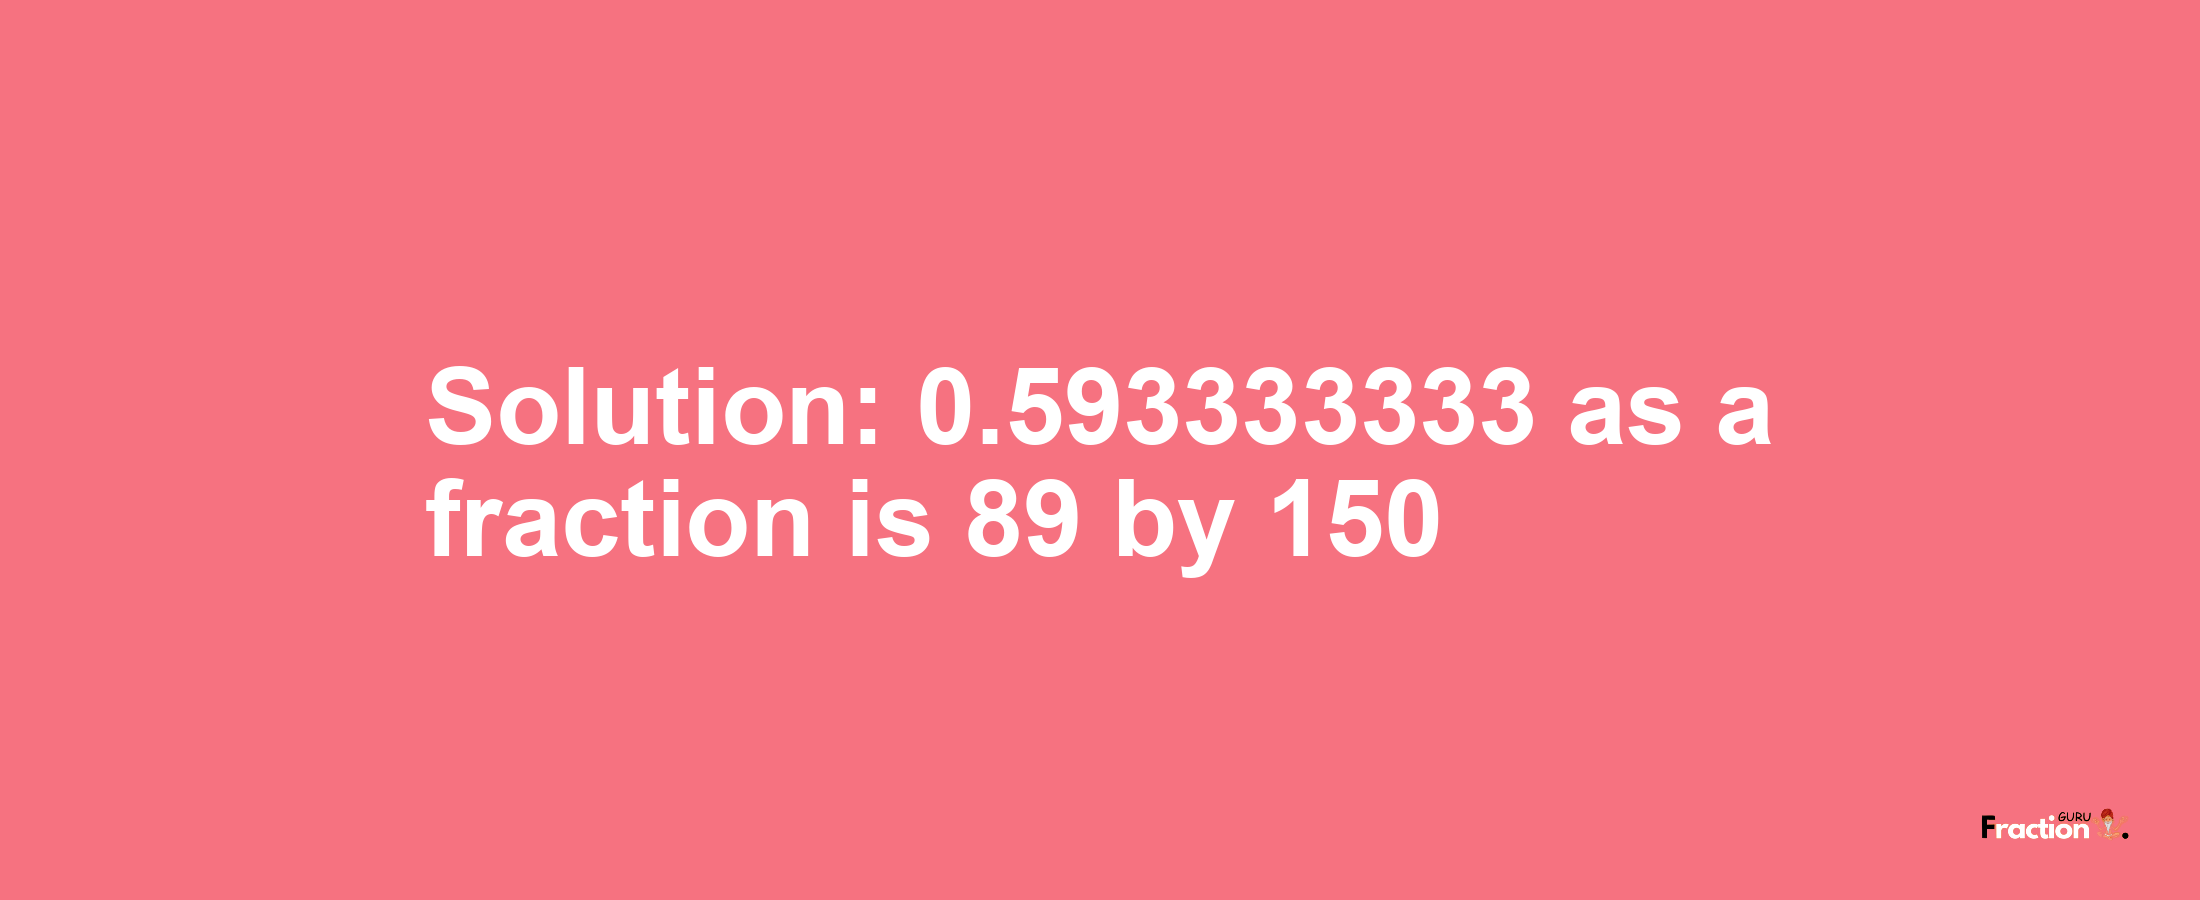 Solution:0.593333333 as a fraction is 89/150